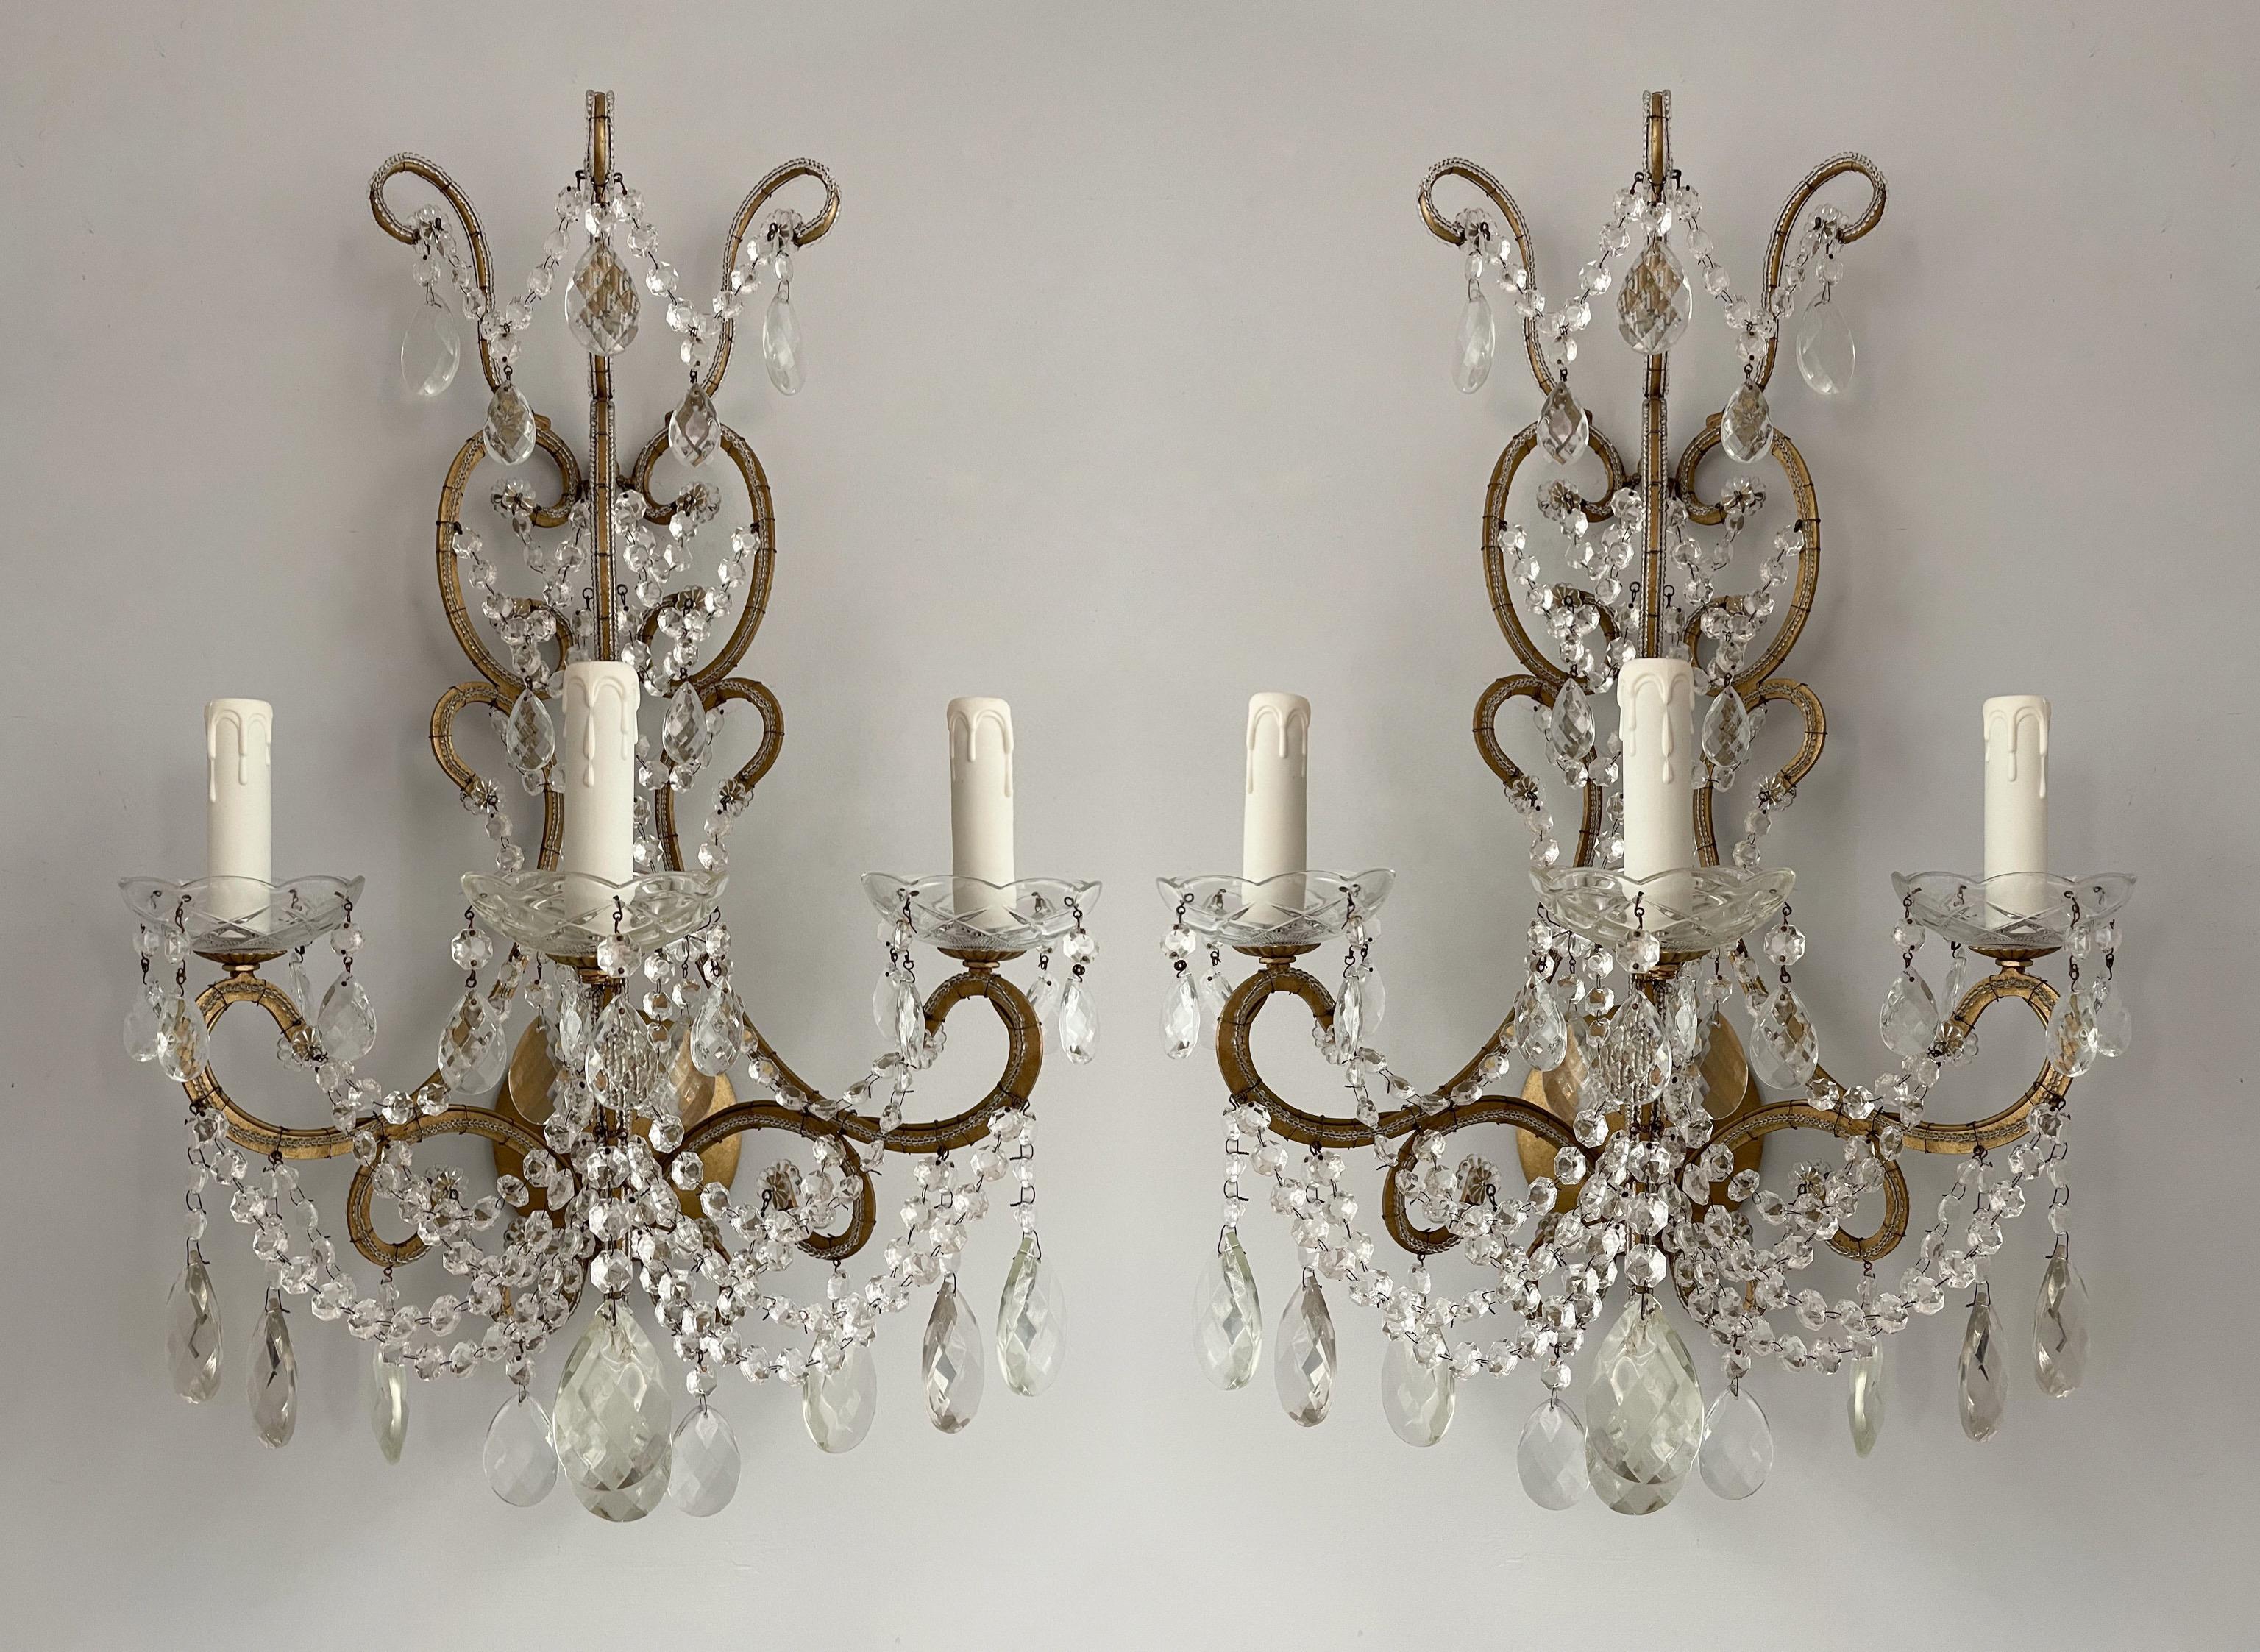 Beautiful, 1960s Italian gilt-iron and crystal beaded sconces. 

These sconces feature flat, scrolled iron frames in an antique gilded finish